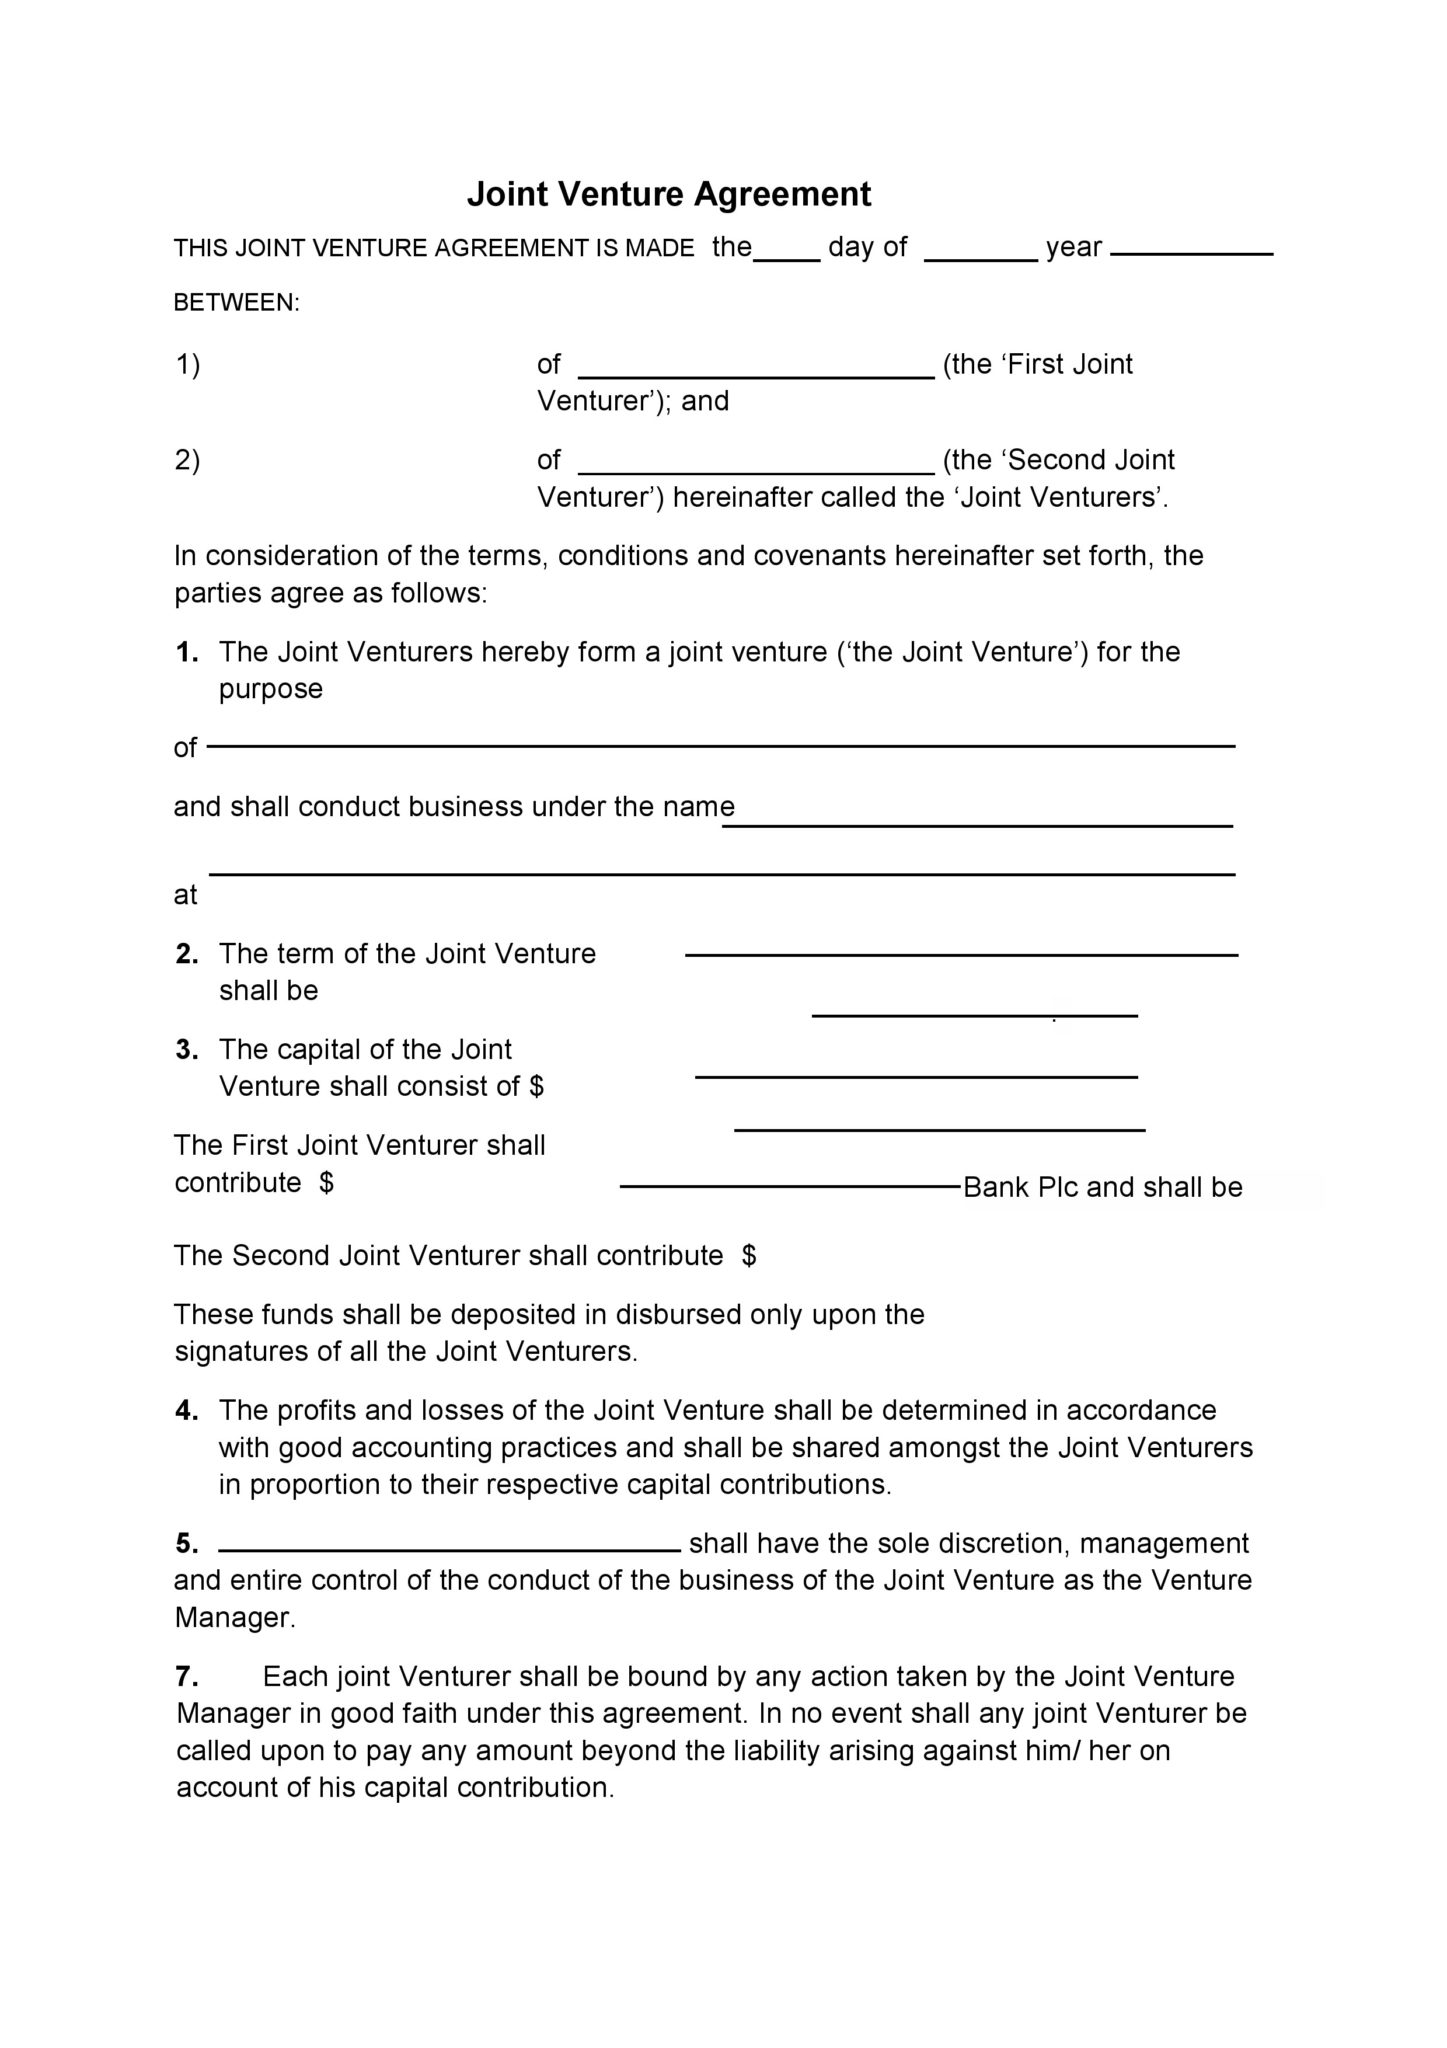 Sample Joint Venture Agreement Between Two Companies Free Printable Business Agreements Printable Agreements